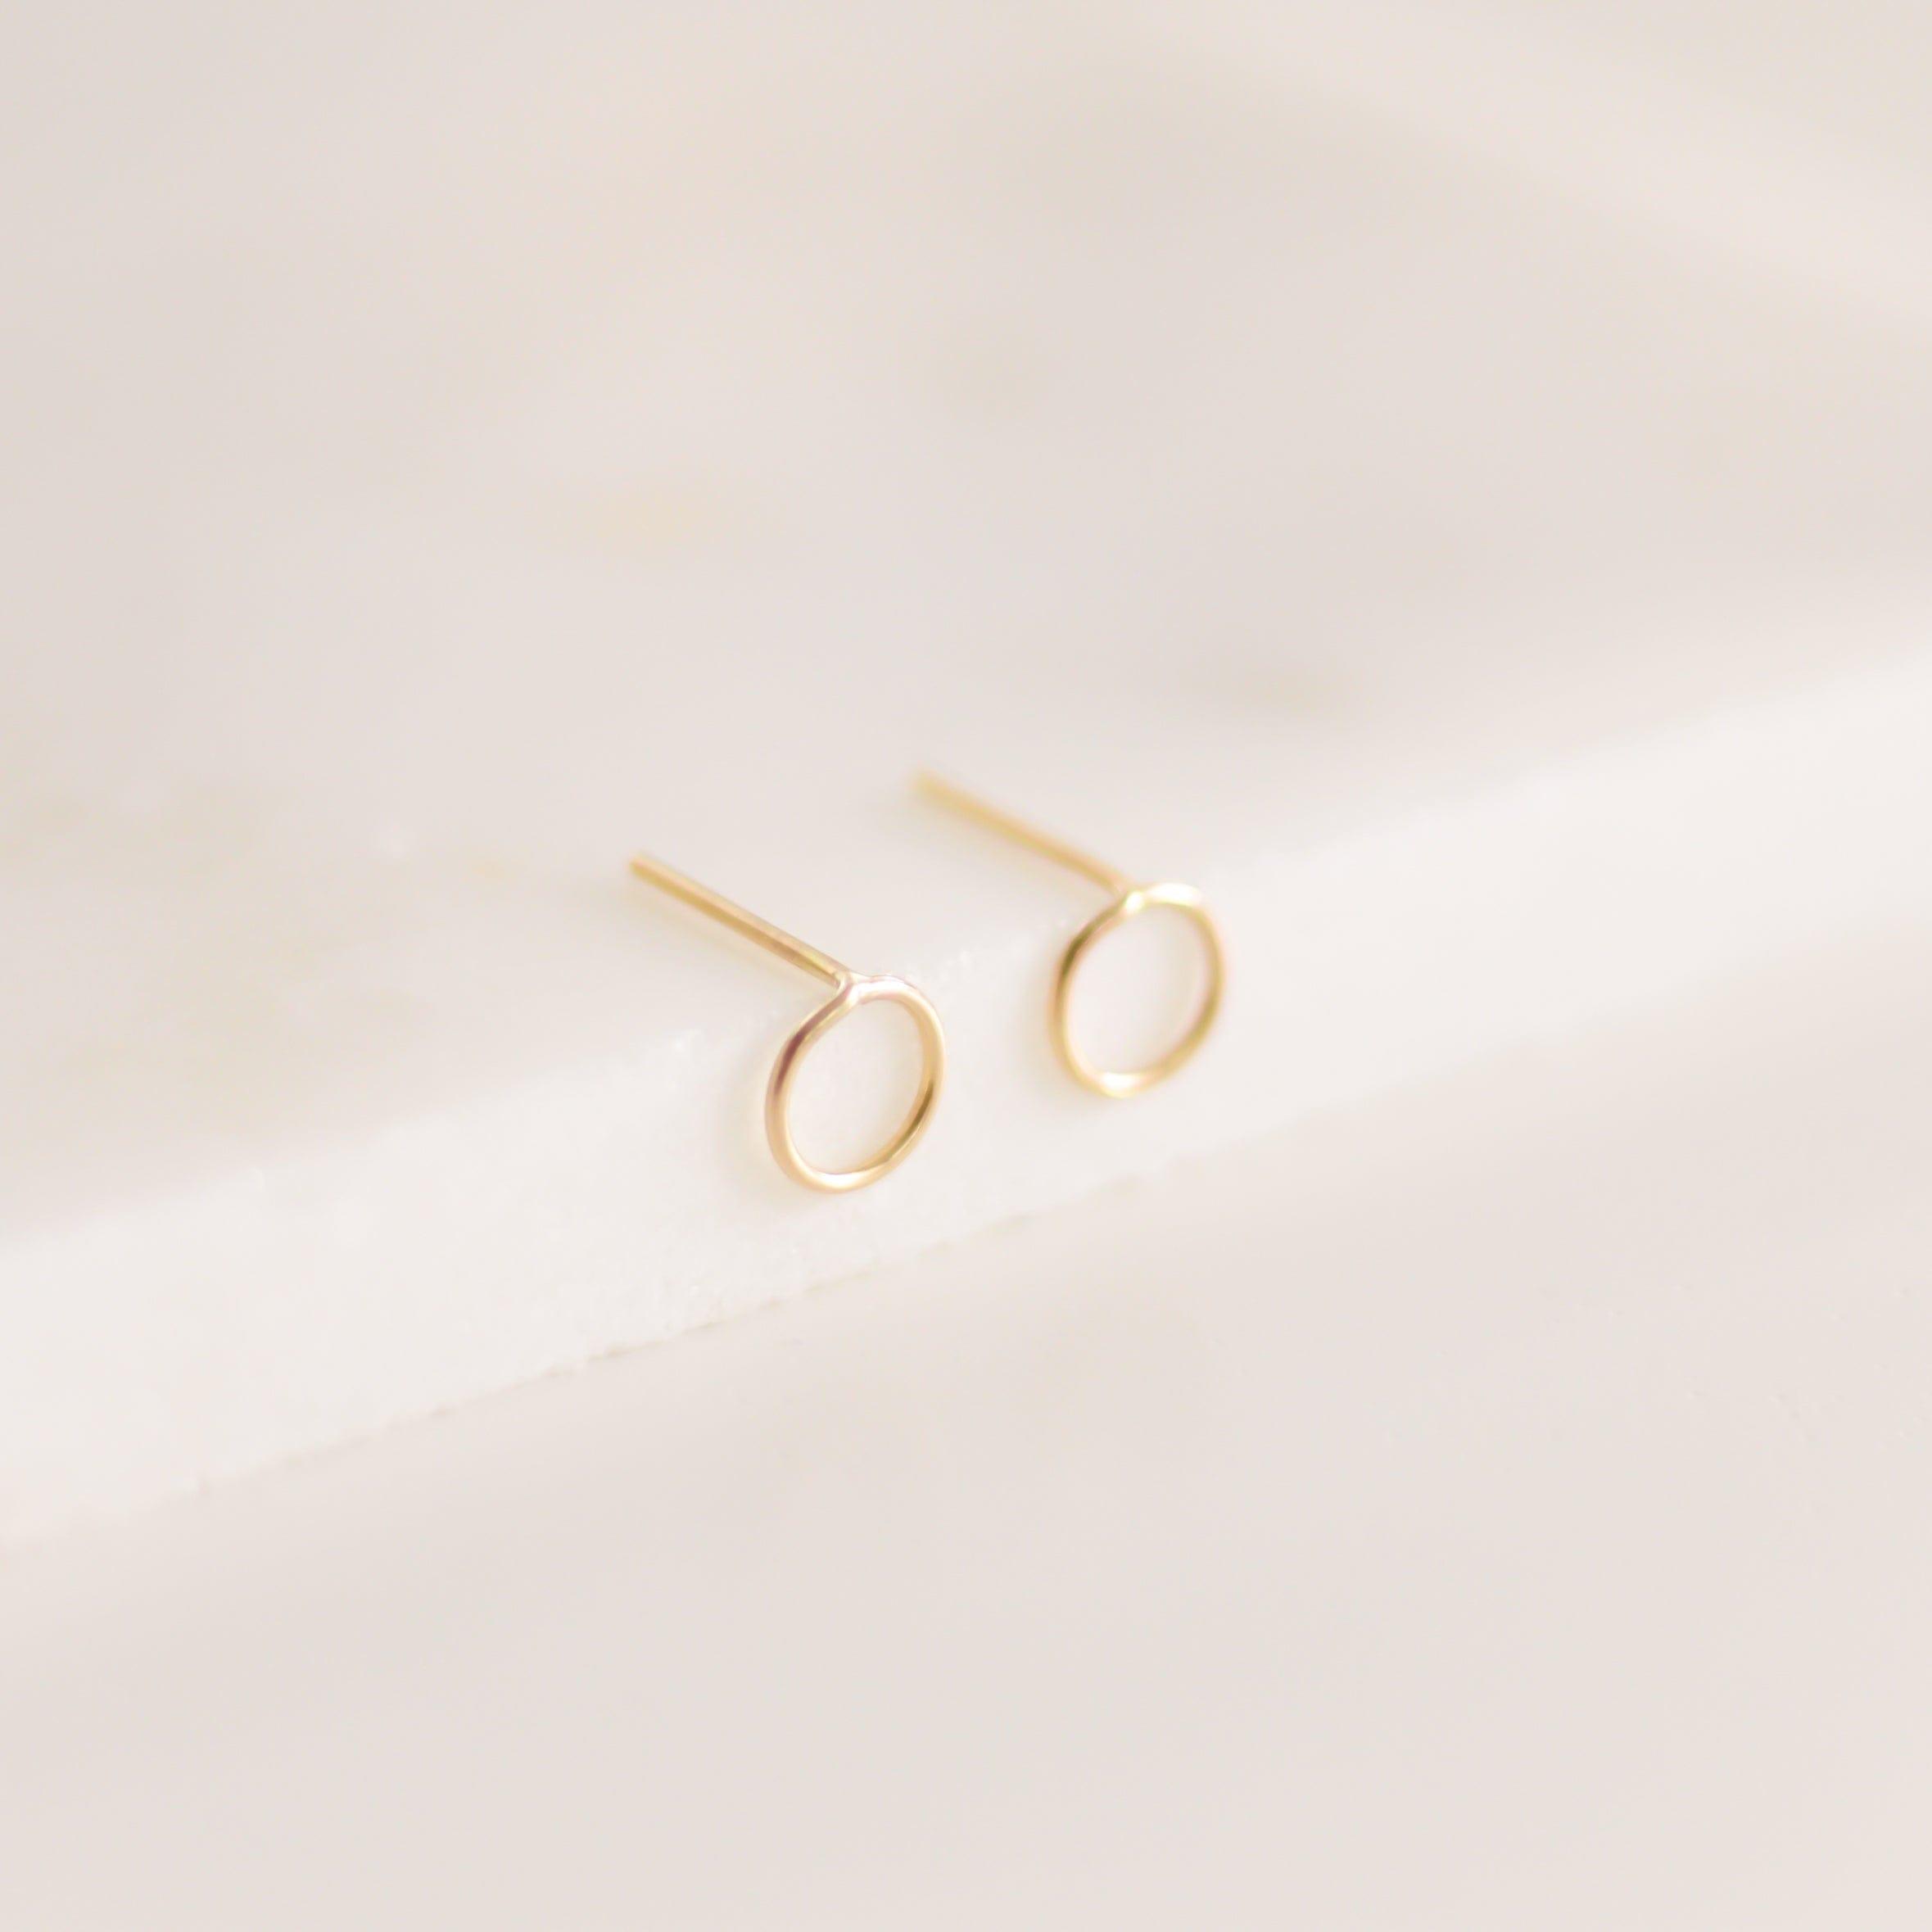 Original Circle Stud Earrings - Nolia Jewelry - Meaningful + Sustainably Handcrafted Jewelry